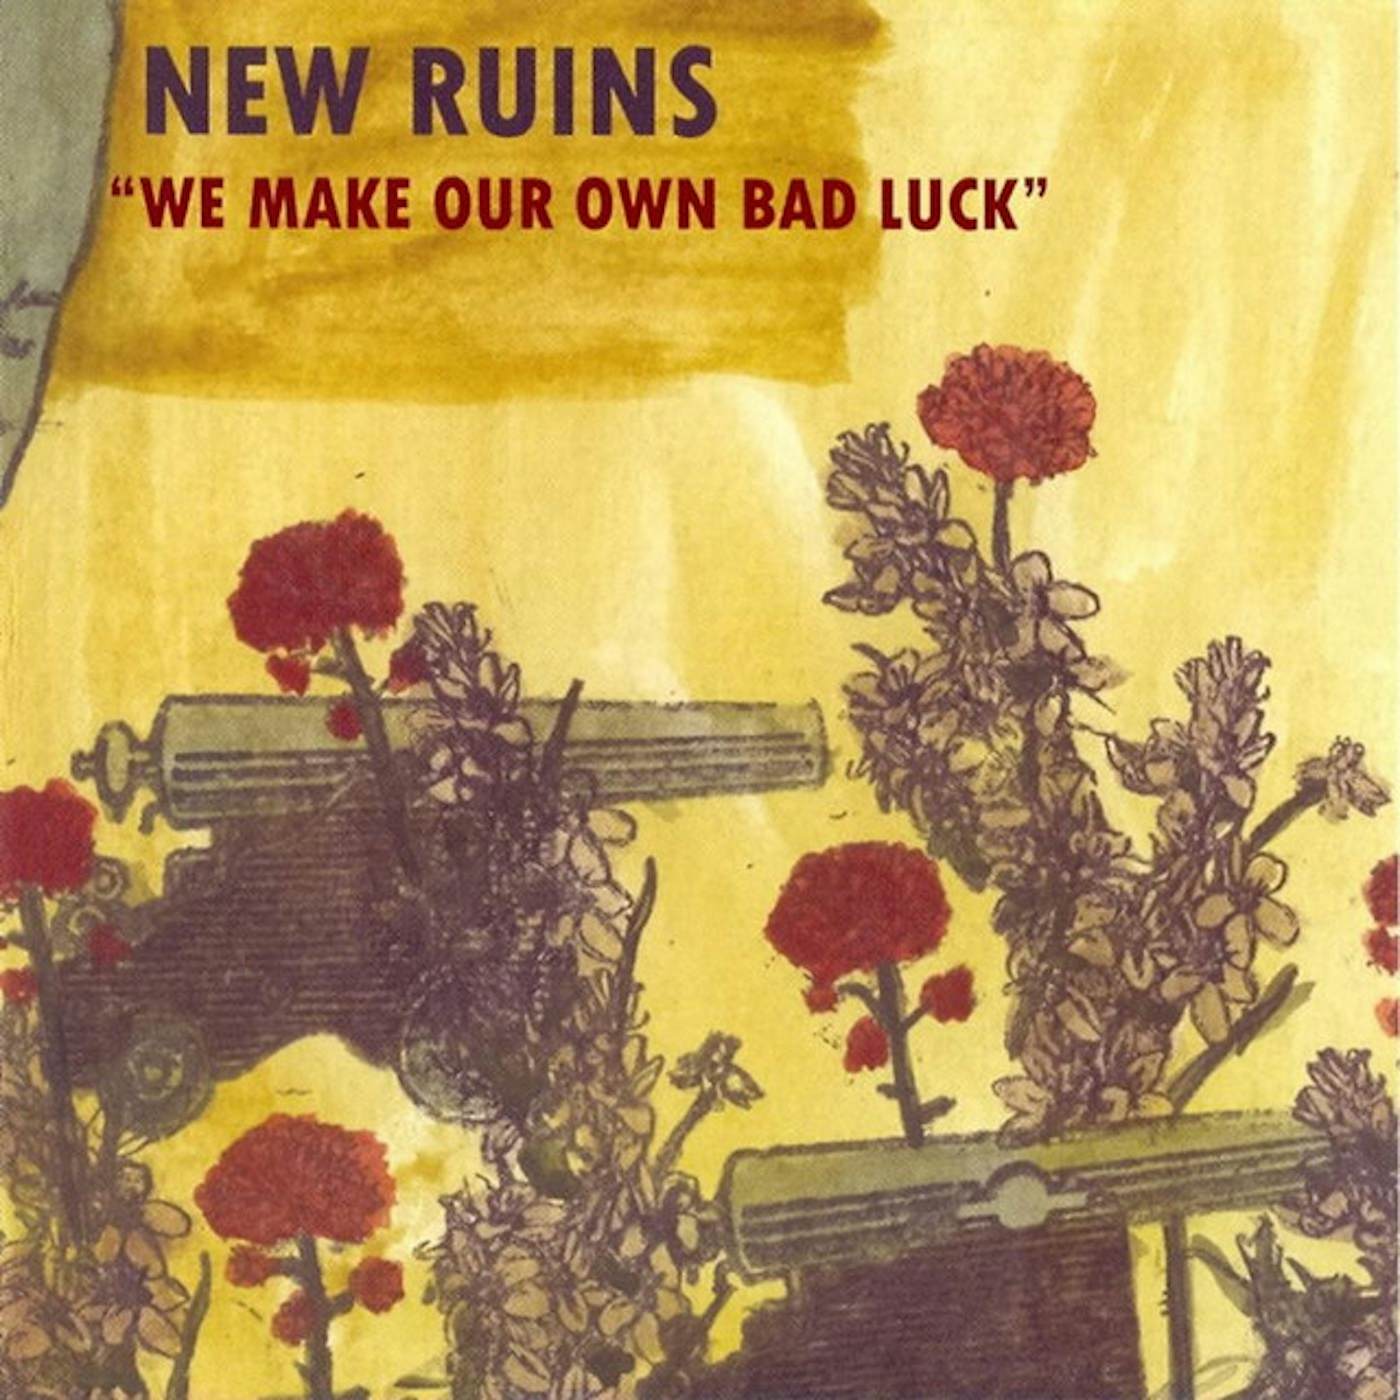 New Ruins WE MAKE OUR OWN BAD LUCK Vinyl Record - Limited Edition